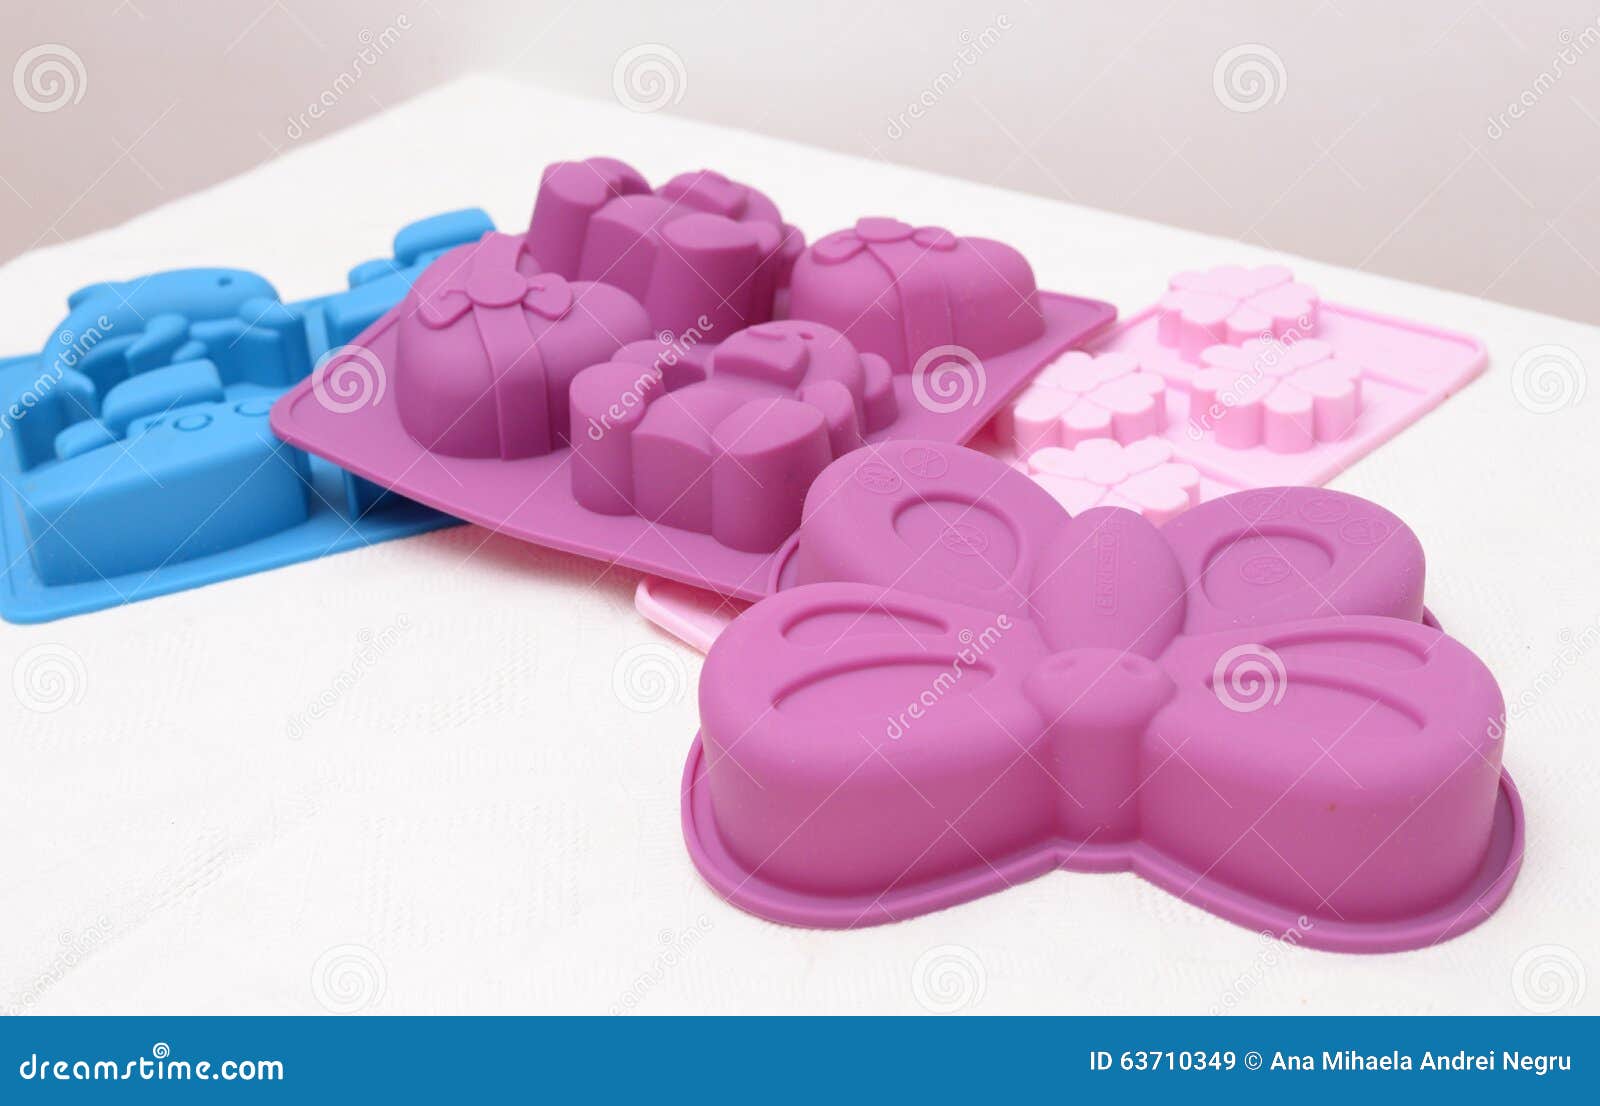 baking silicone moulds